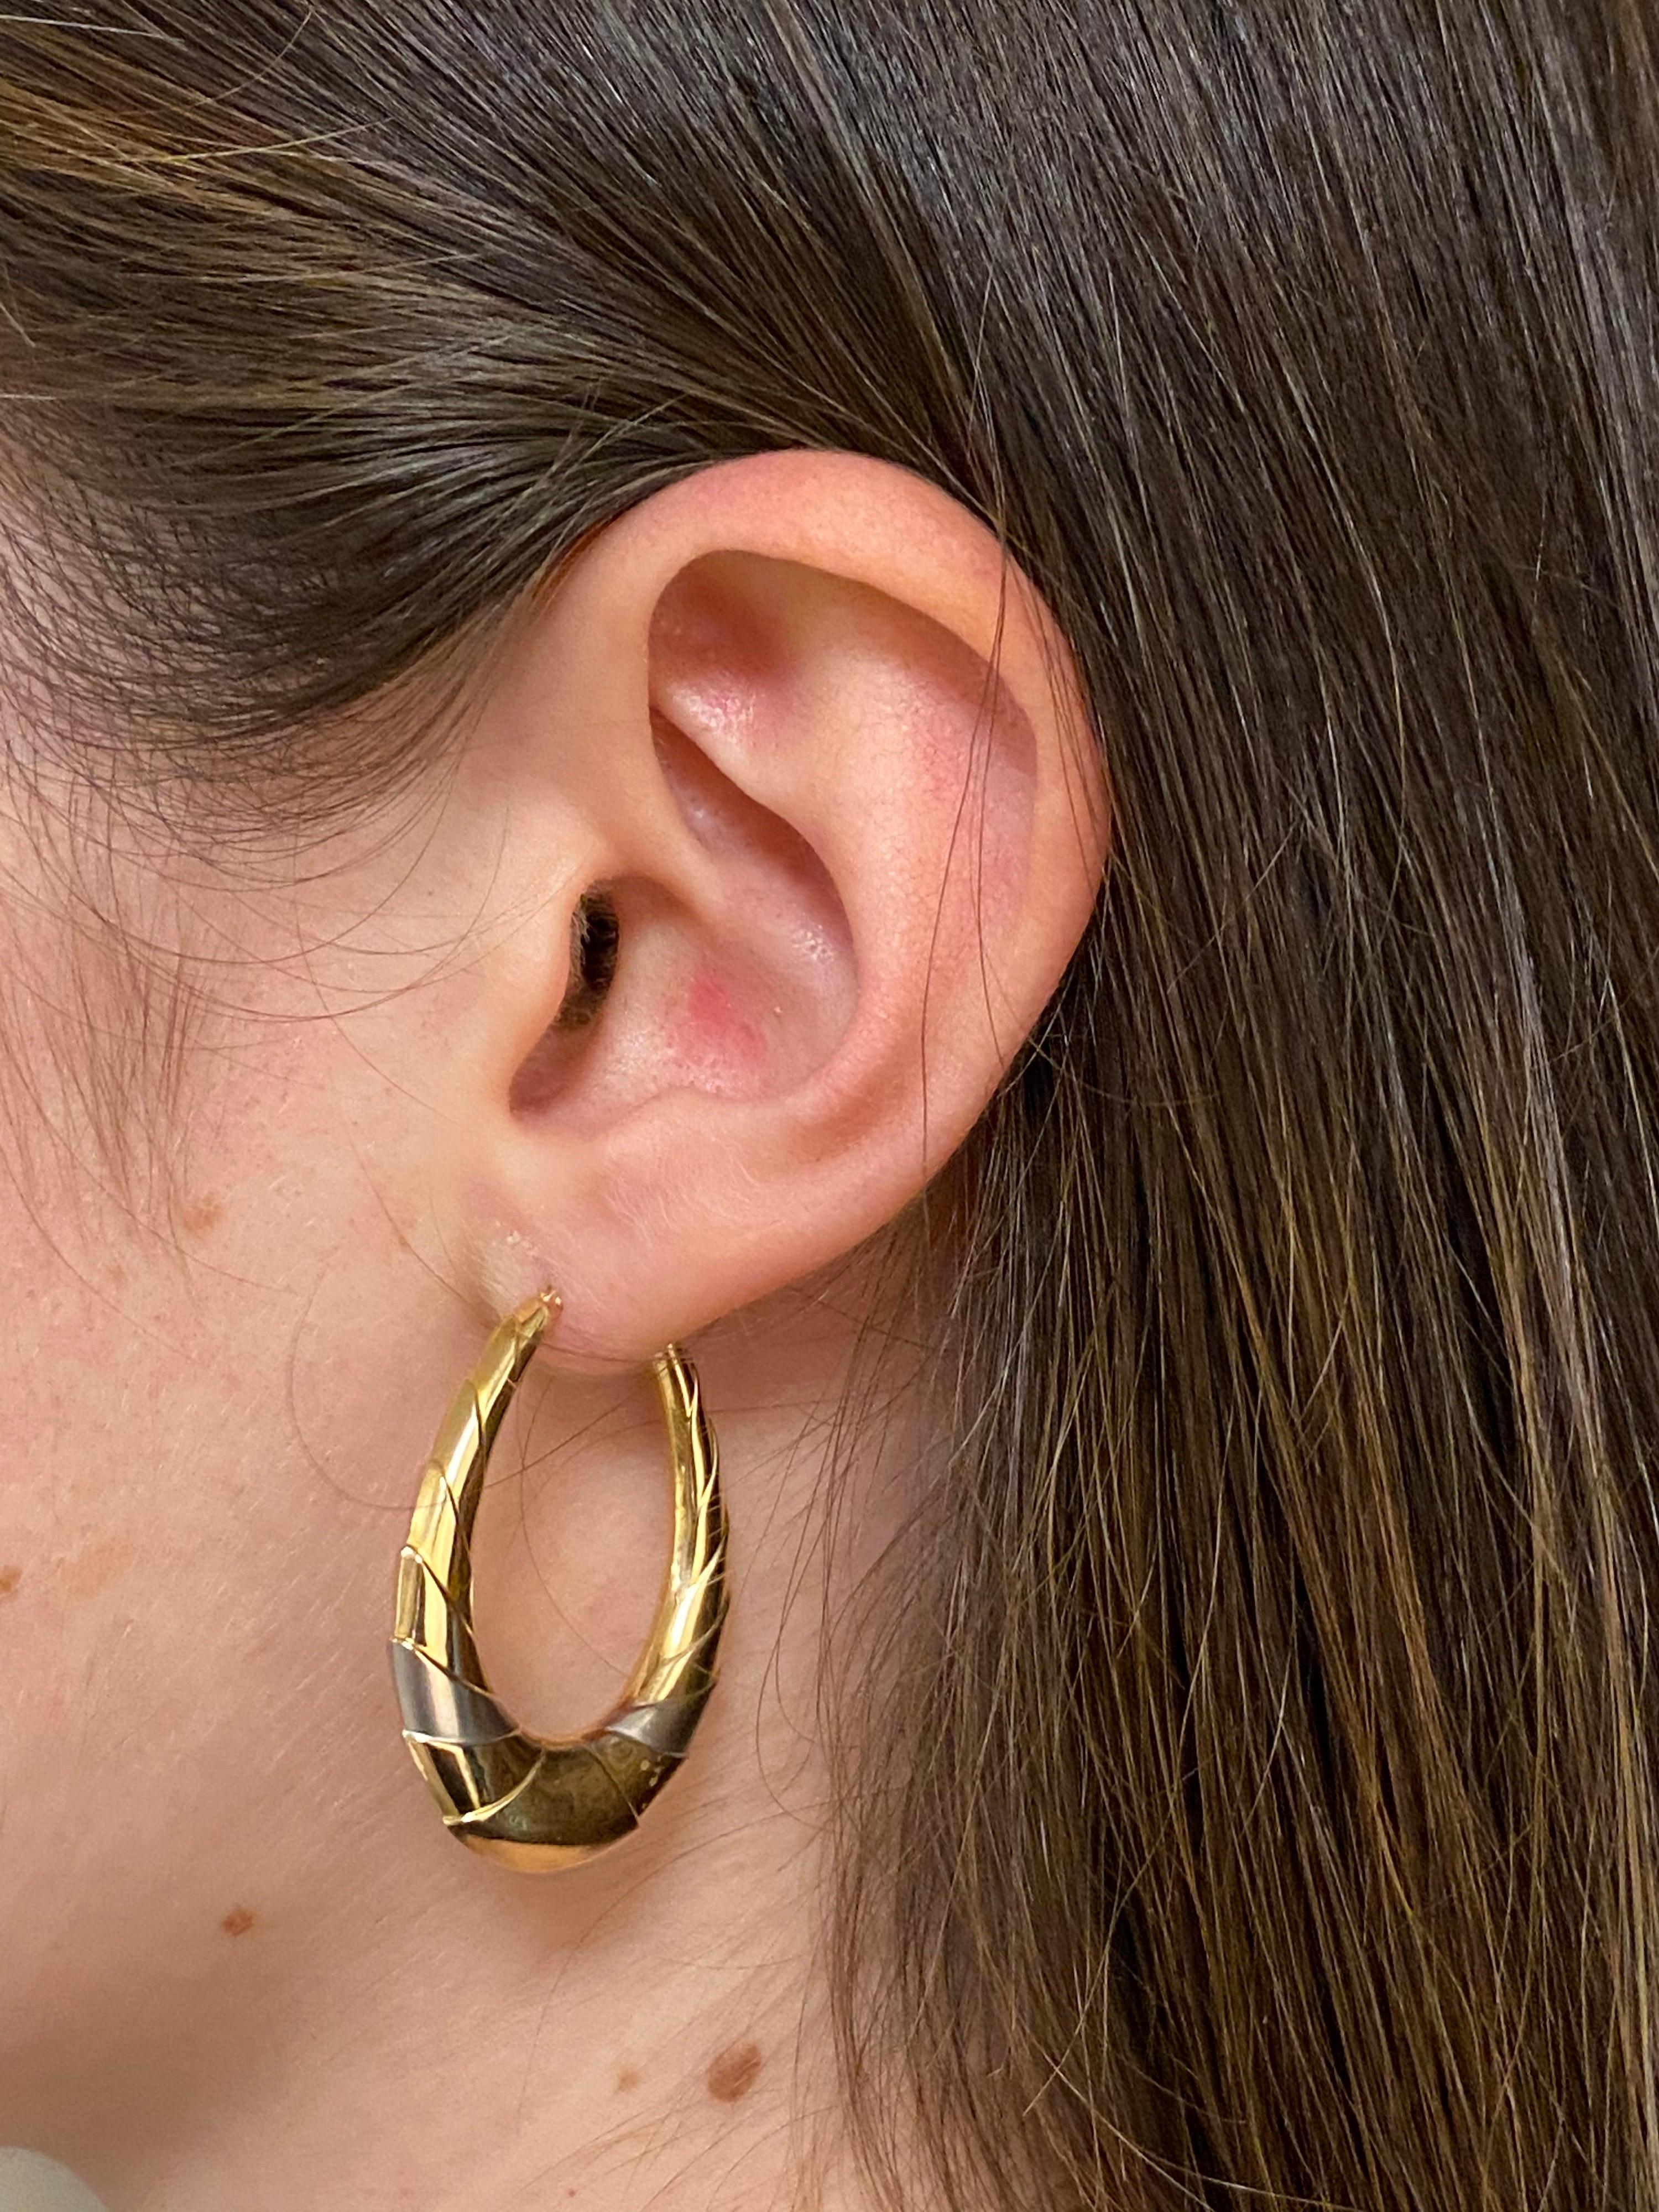 18K Gold Hoop Earrings

Earrings
electro-formed which allows the earrings to be light.
A crescent decoration adorns the pretty volume of these.
Each earring weighs 2g, measures at the pendant 3.5cm or 1.378 inch